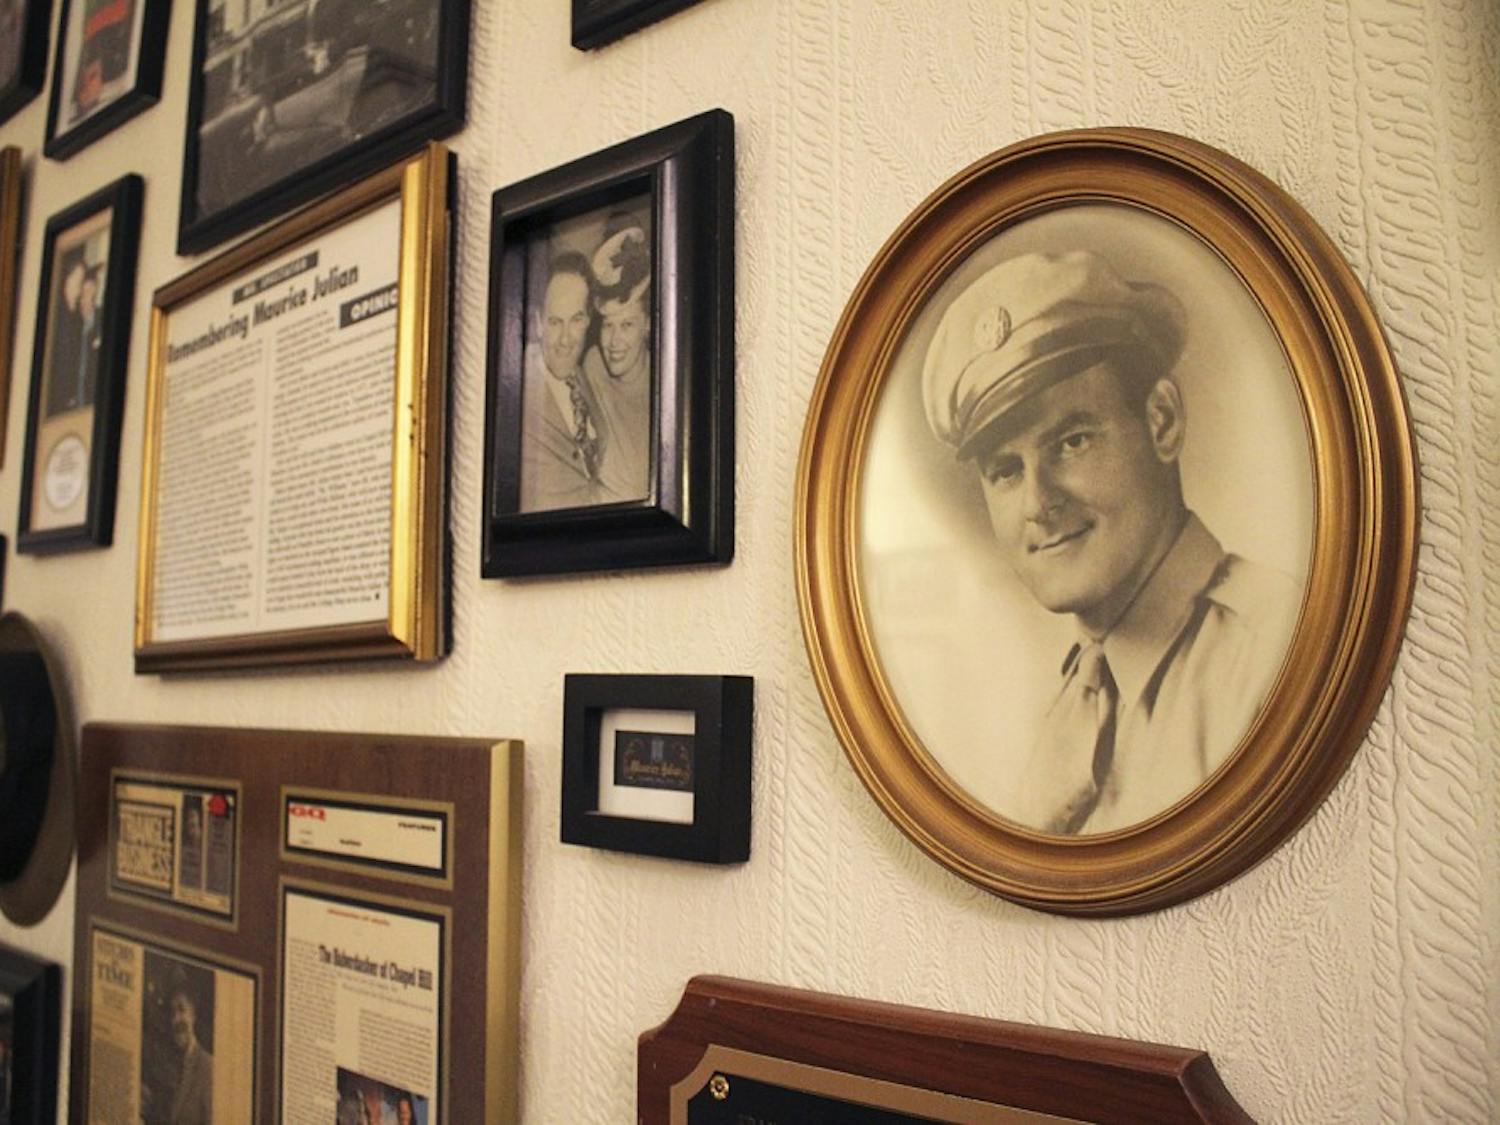 Photos and articles commemorating business leader Maurice Julian (right) and his family hang on the back wall in Julian’s on Franklin Steet.